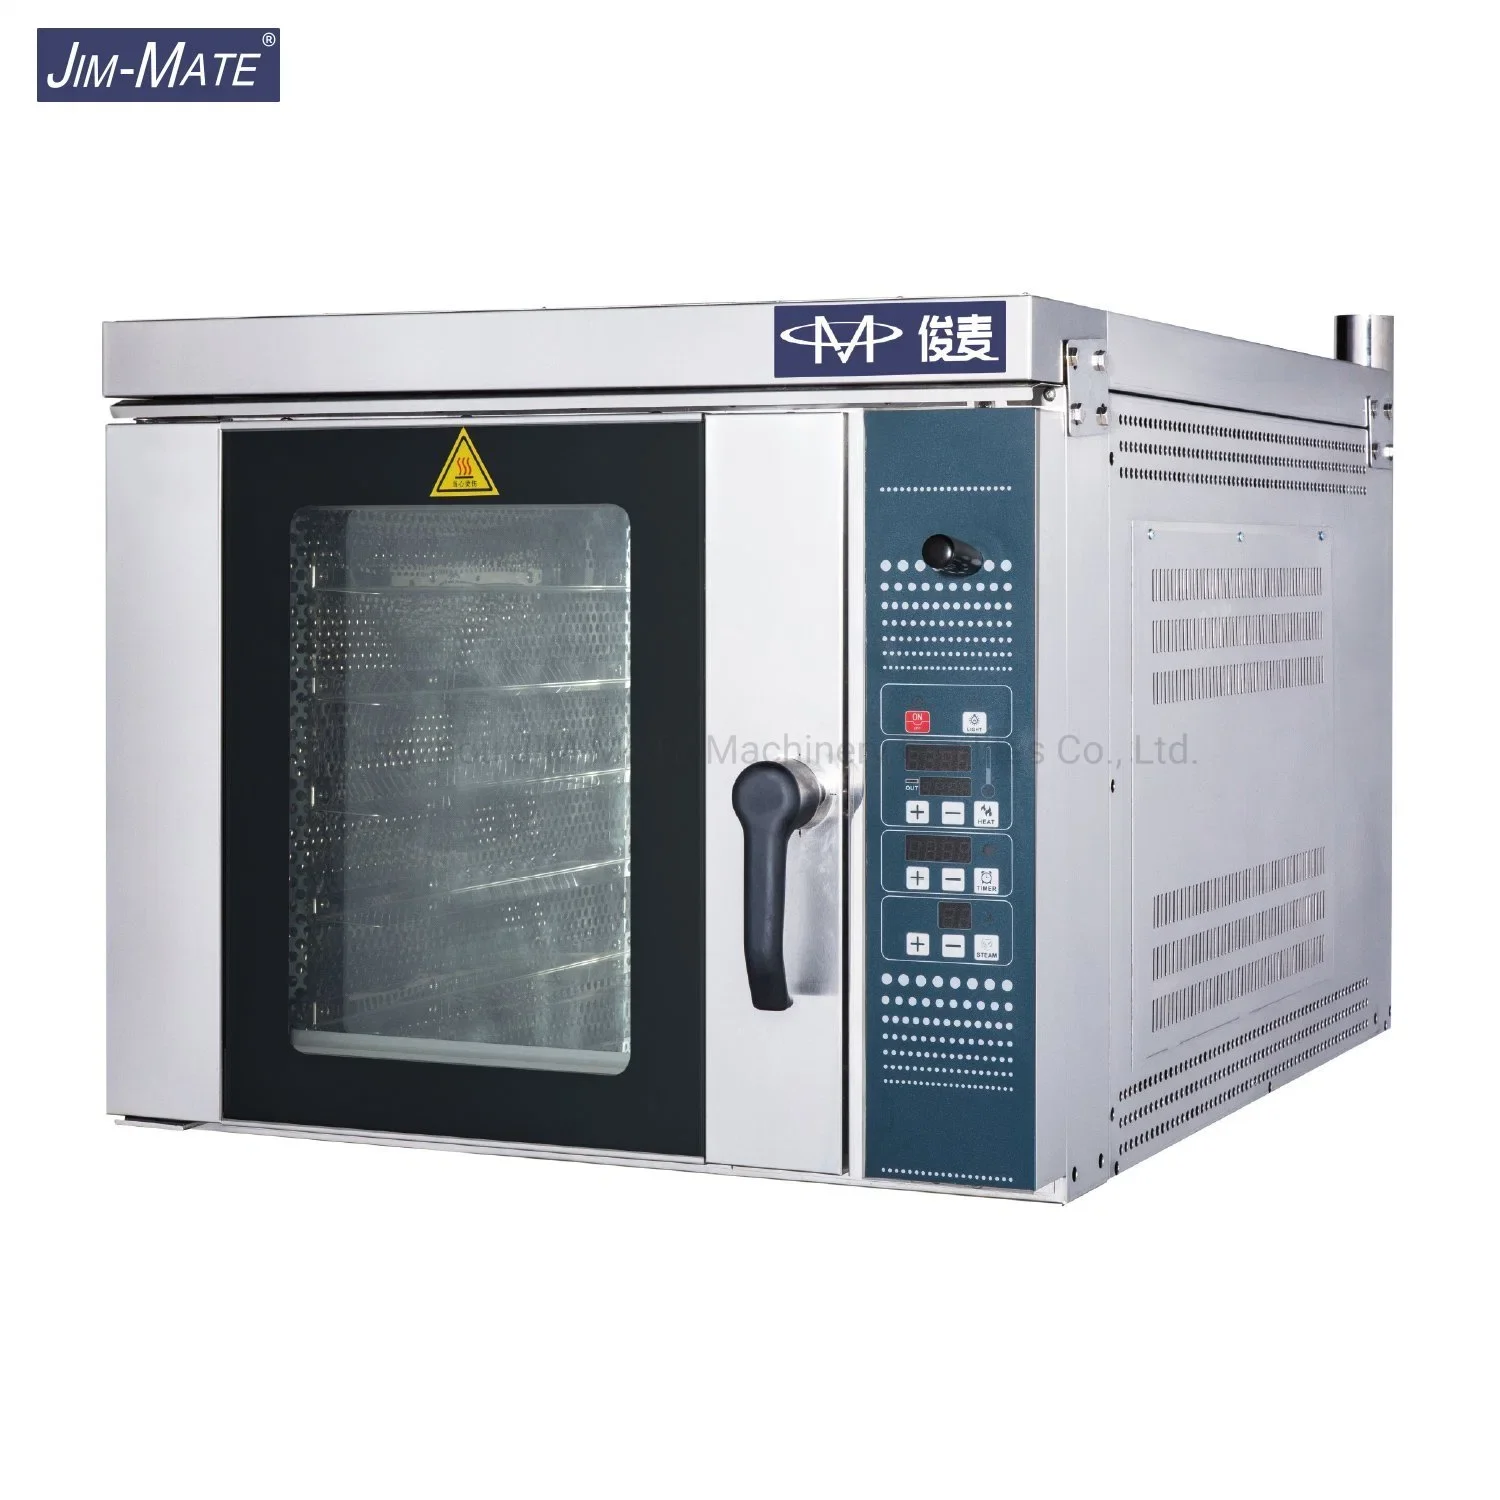 Bakery Equipment Kitchen Catering Equipment Commercial Use Cake Shop Machine 5 Trays Bread Cake Pizza Baking Machine Electric commercial catering air cooling small stainless steel ice popsicle maker machine making popsicle machine for snack food factory